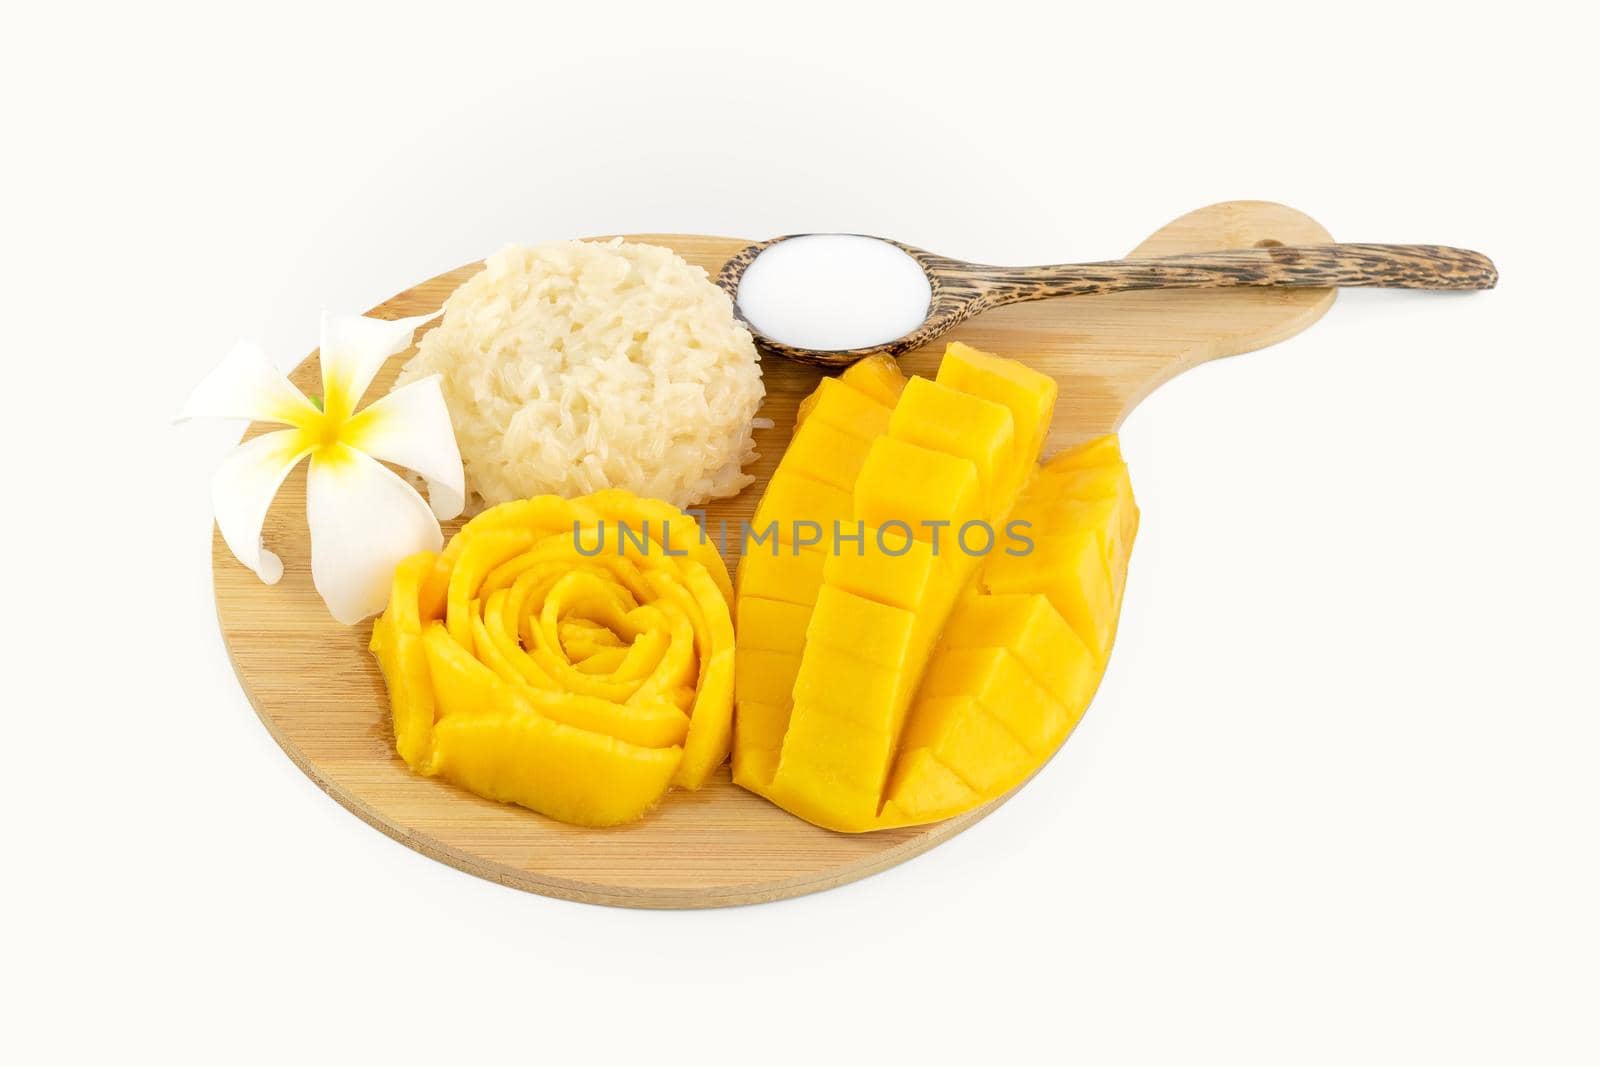 Mango Sticky Rice with flower on a wooden plate over white background